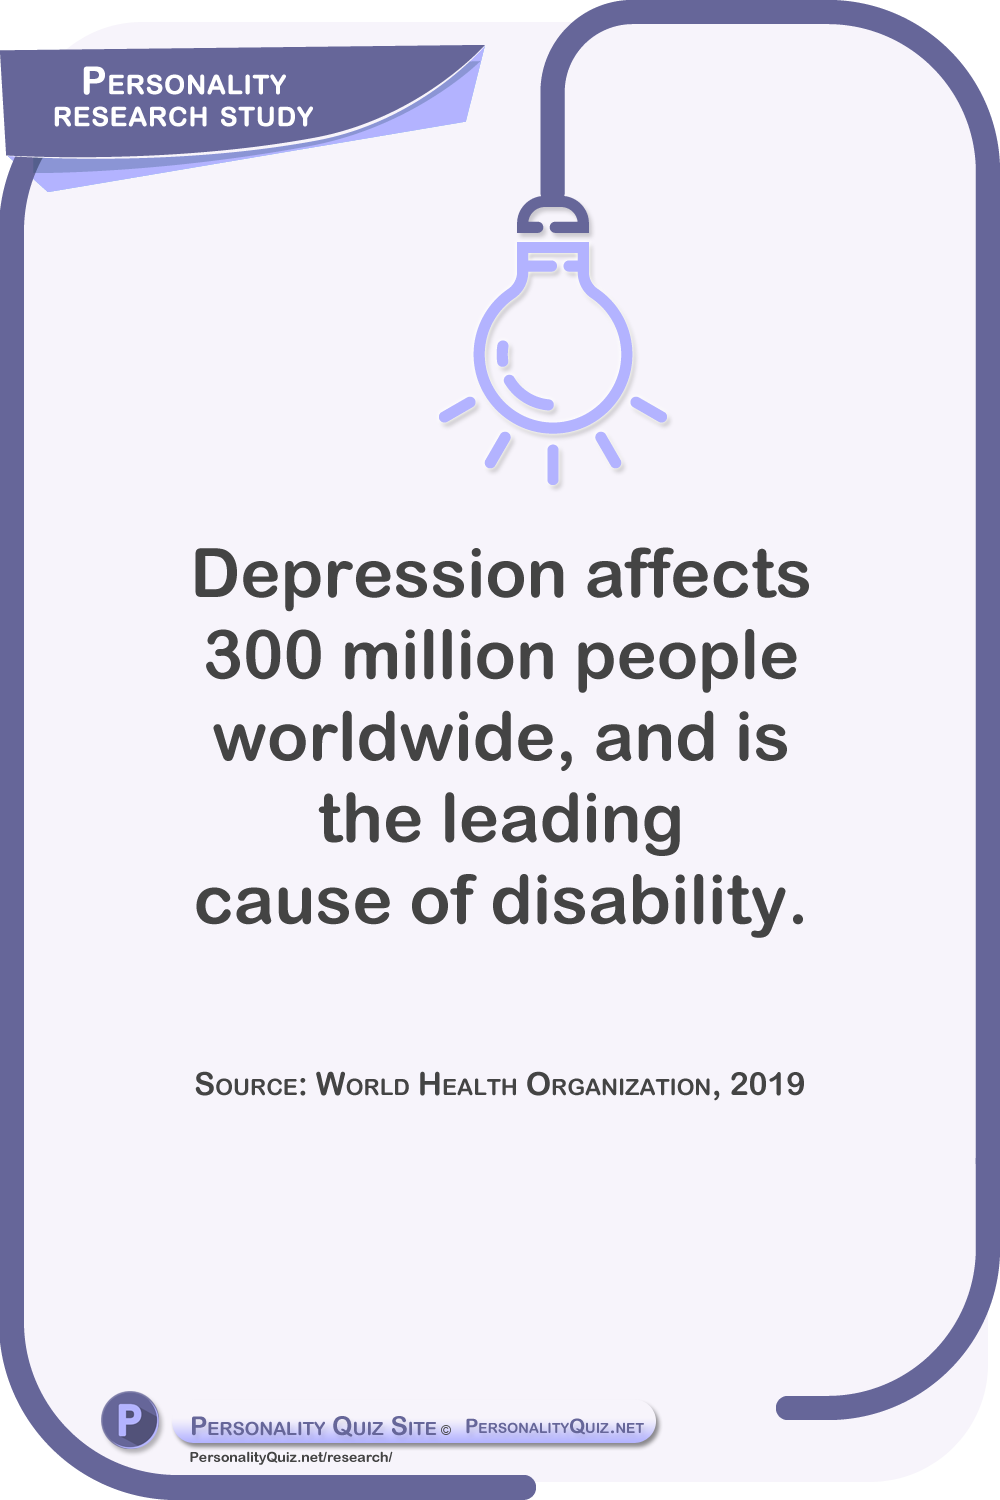 Depression affects 300 million people worldwide, and is the leading cause of disability. Source: World Health Organization, 2019